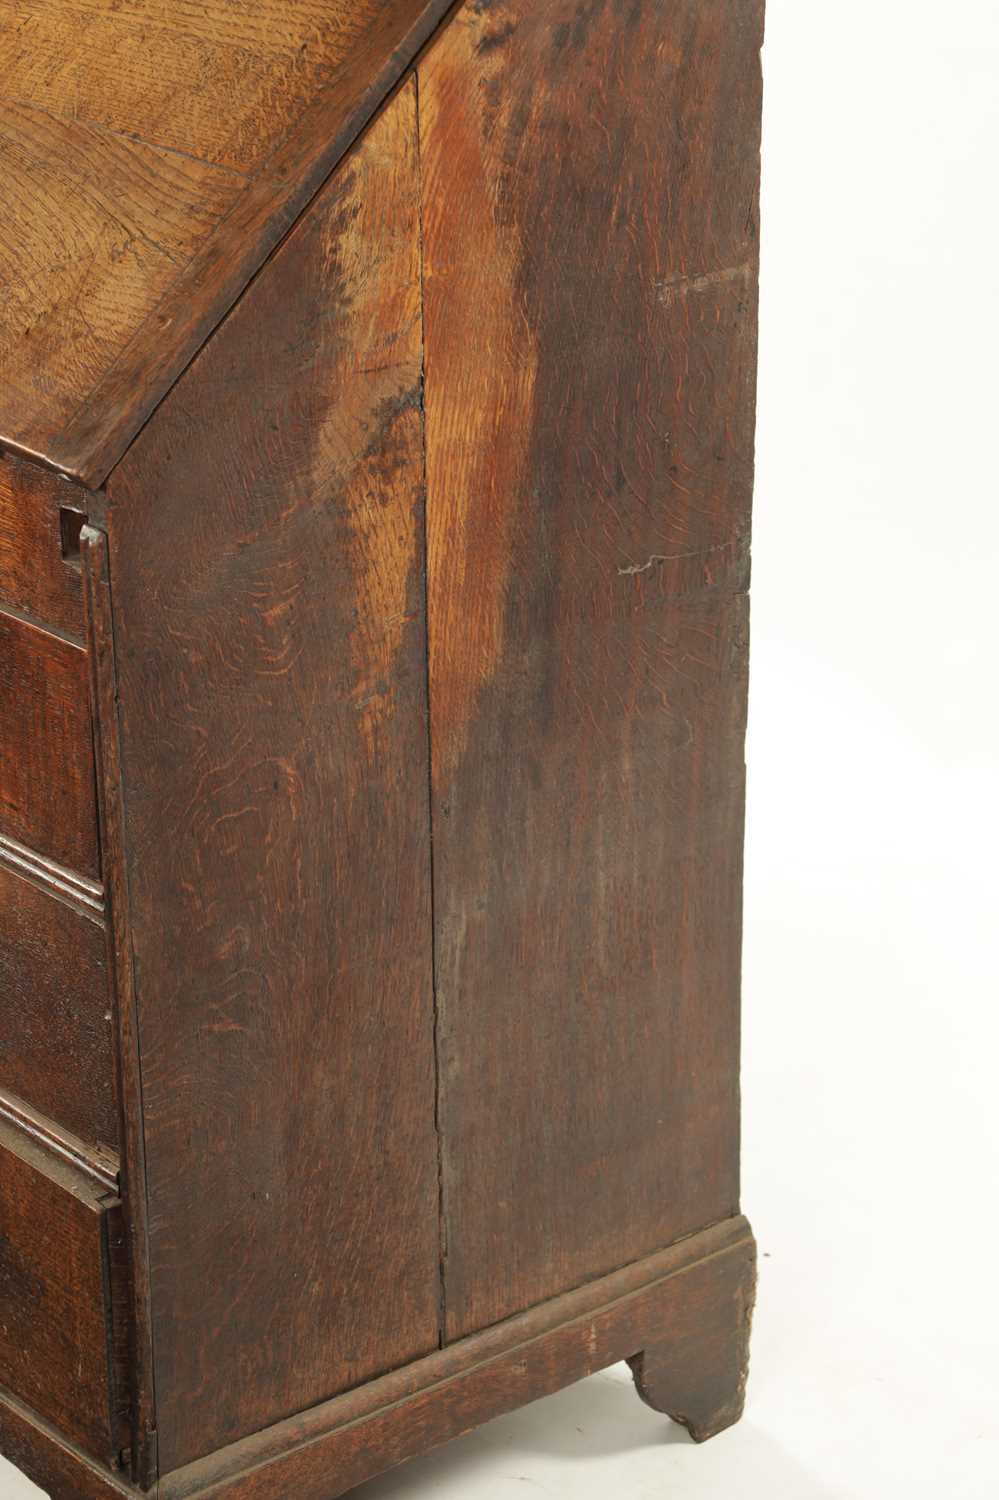 AN EARLY 18TH CENTURY FIGURED OAK COUNTRY MADE BUREAU - Image 11 of 11